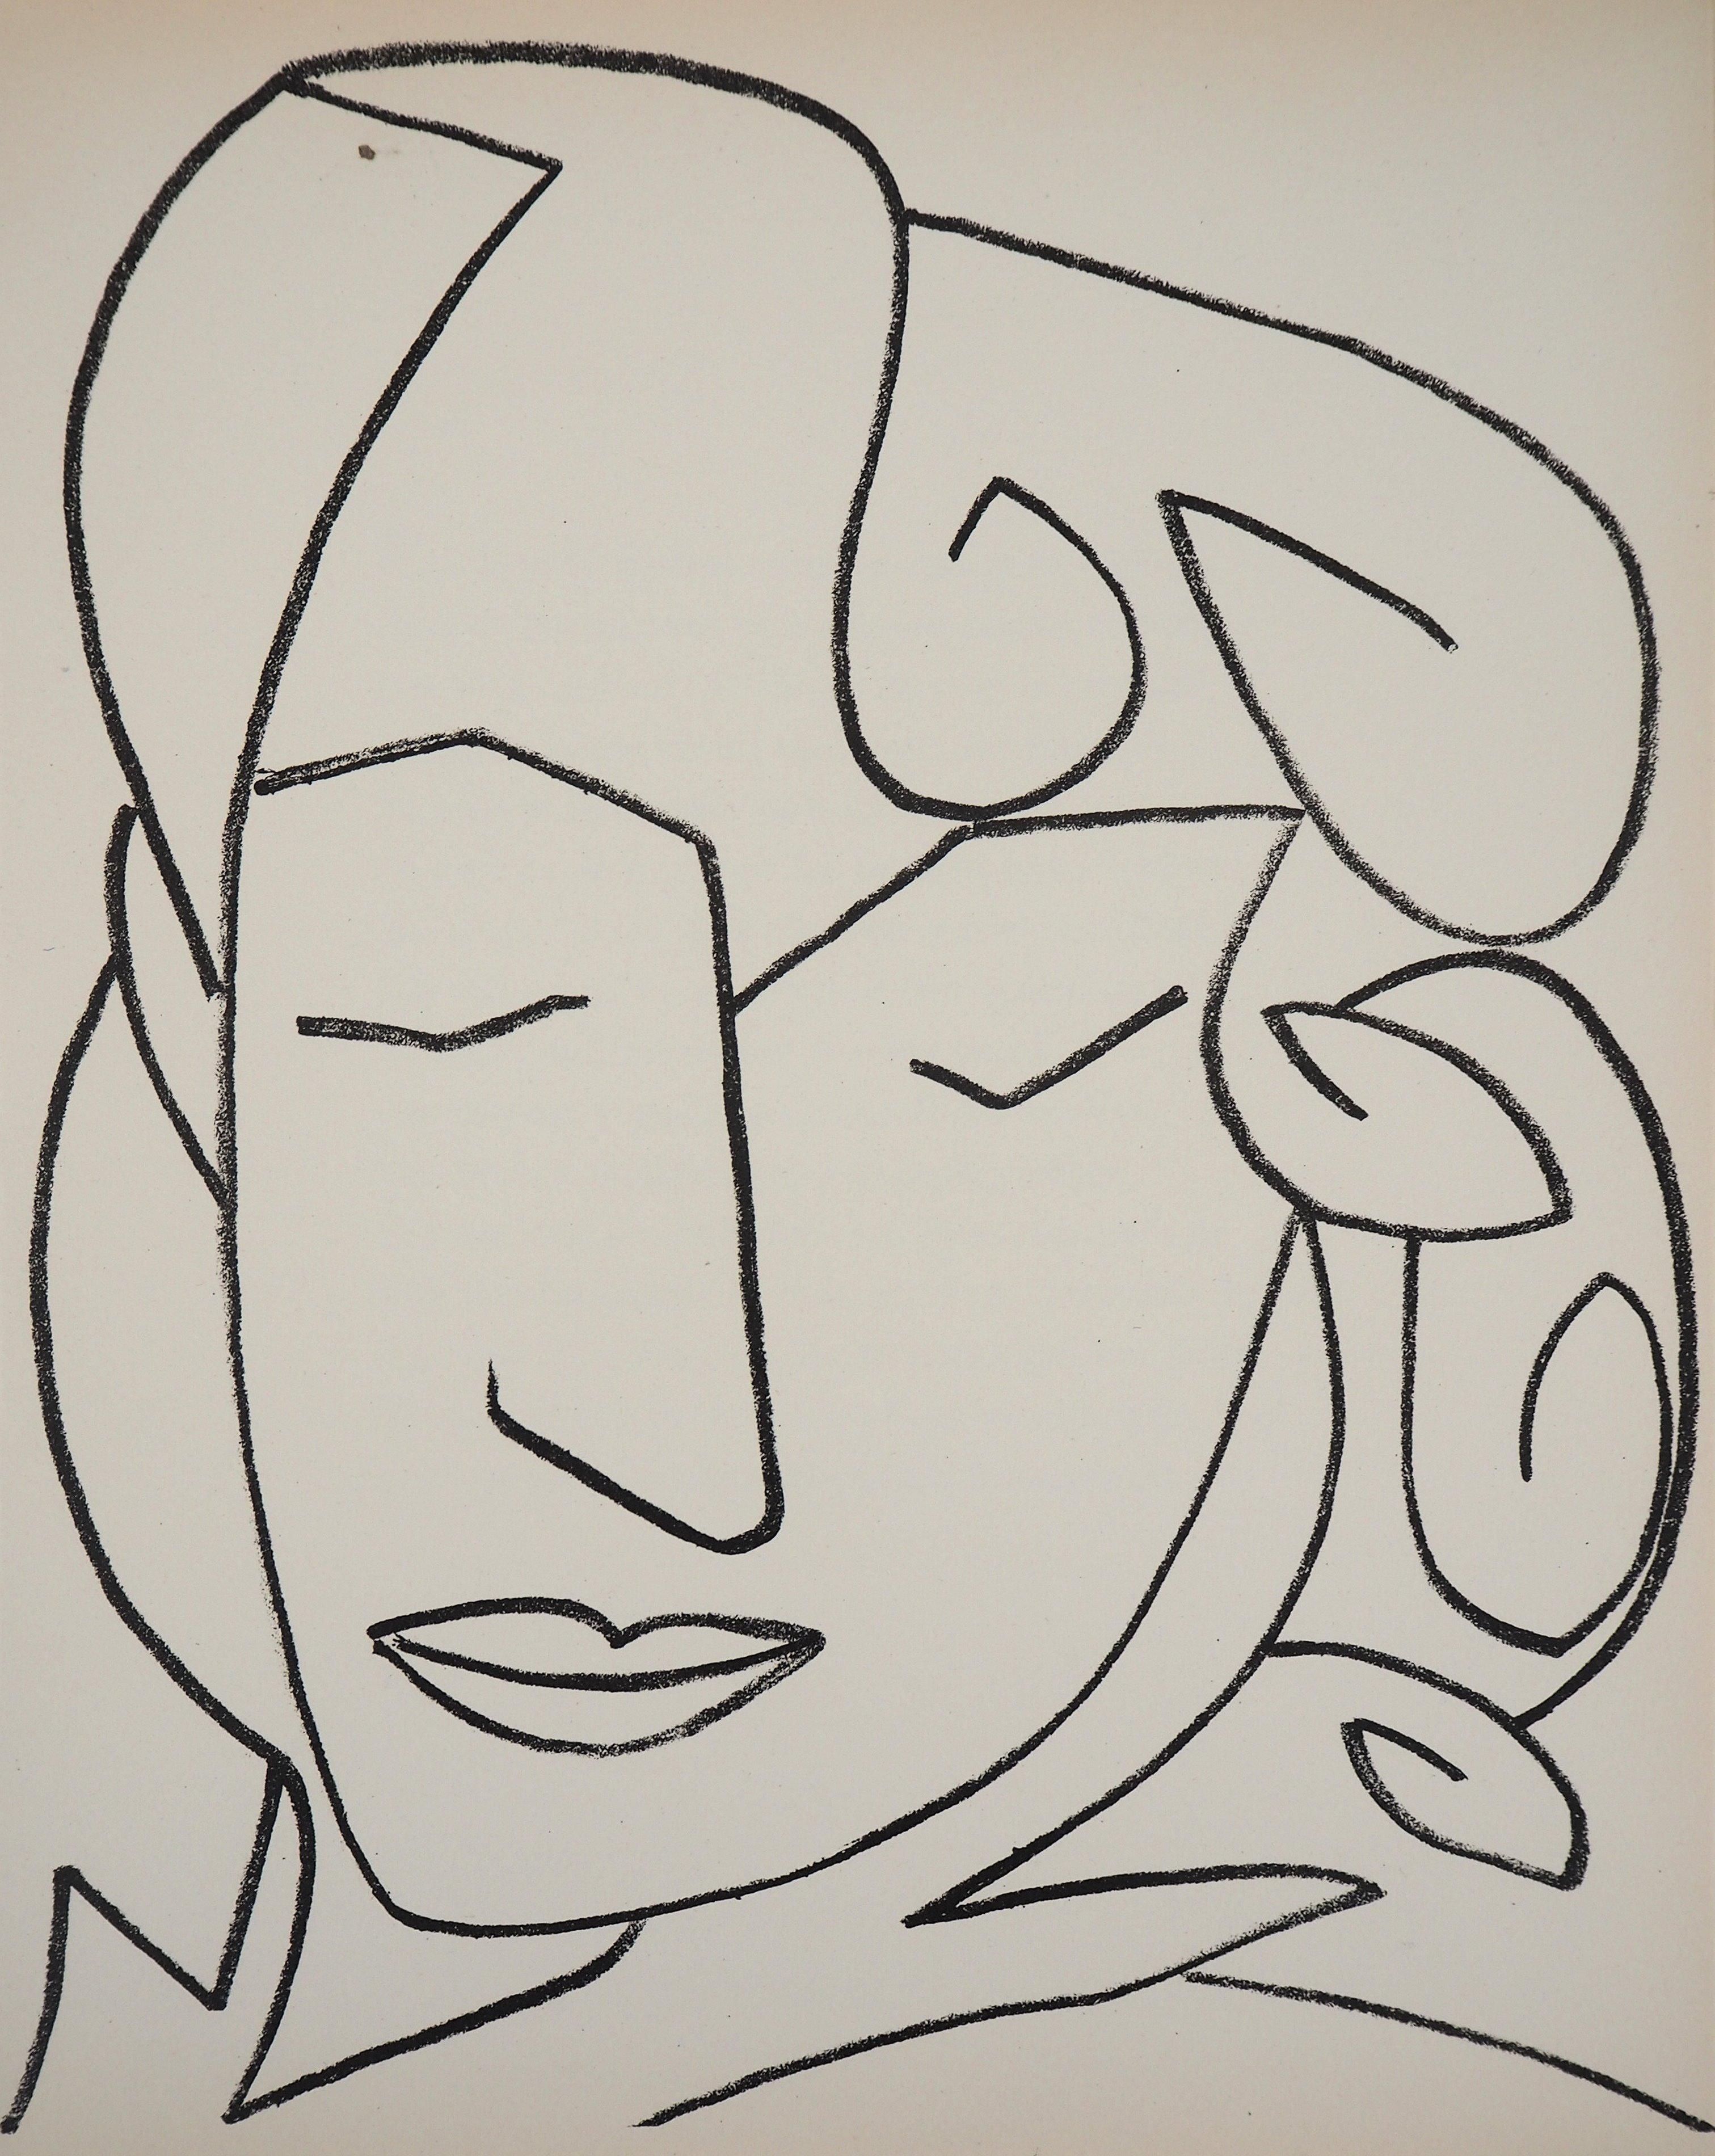 Portrait of a Woman with Closed Eyes, 1951 - Original lithograph